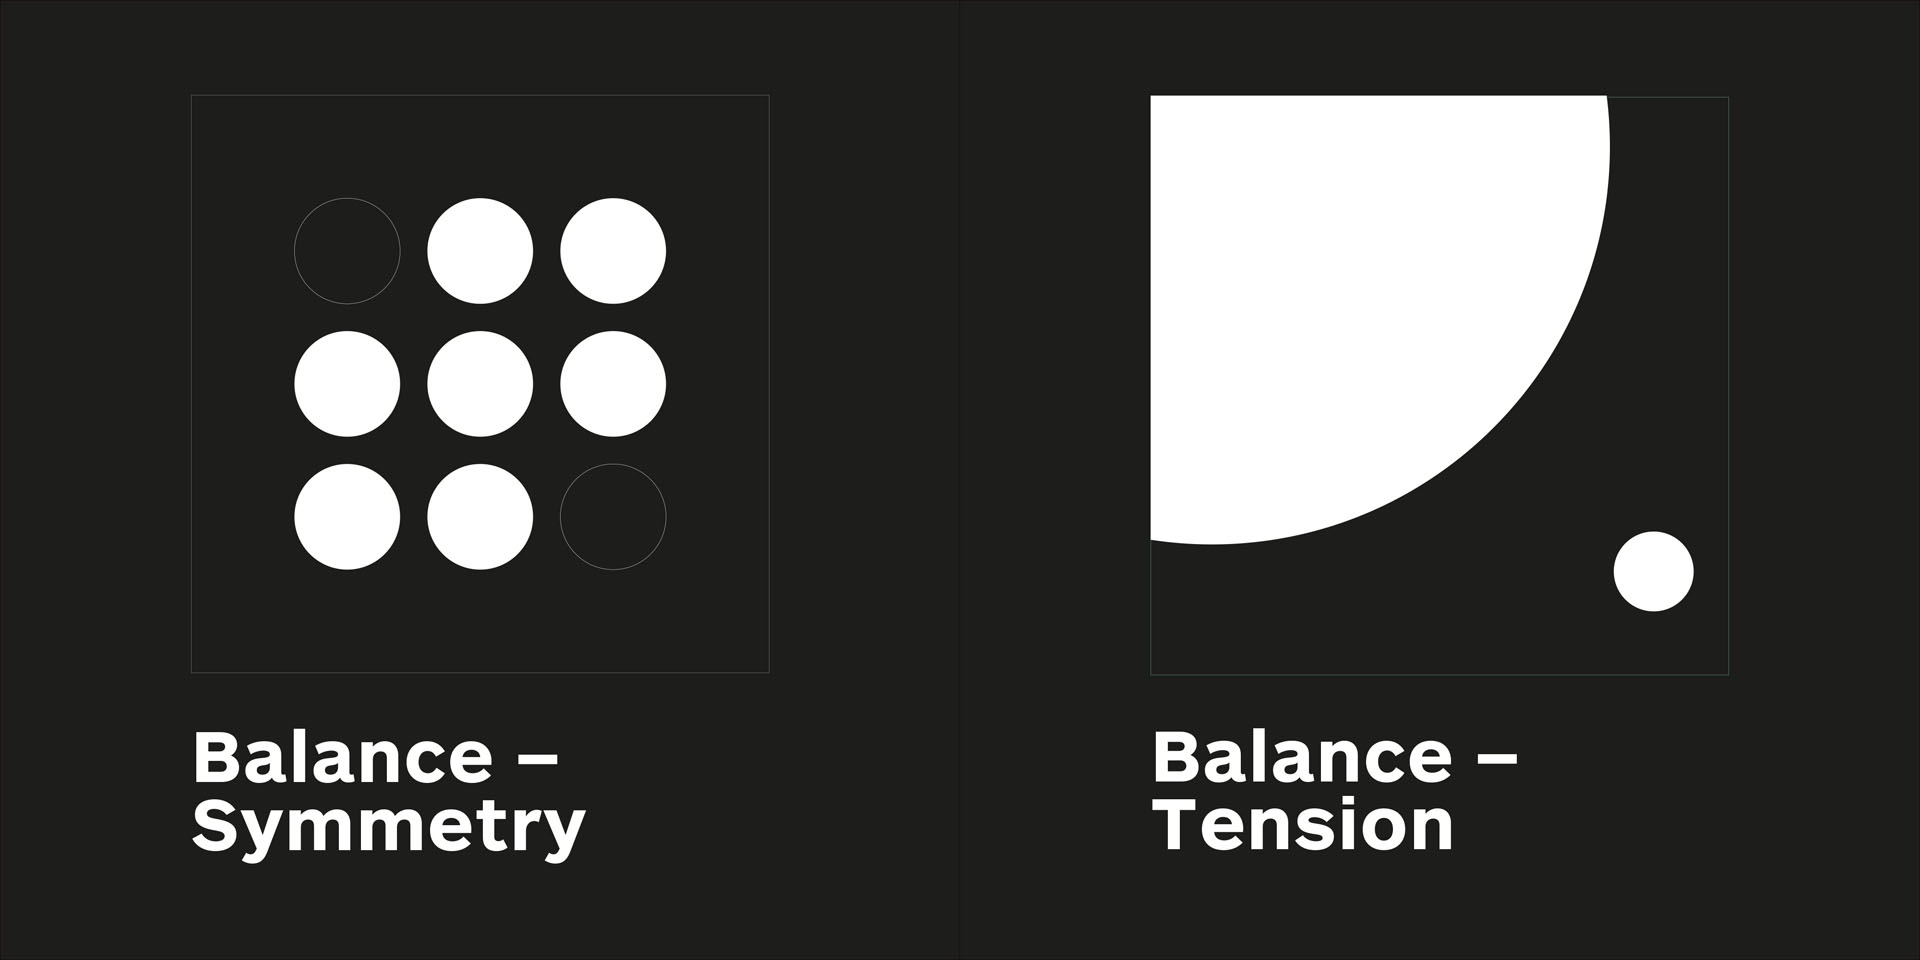 Illustration of the balance principles in graphic design